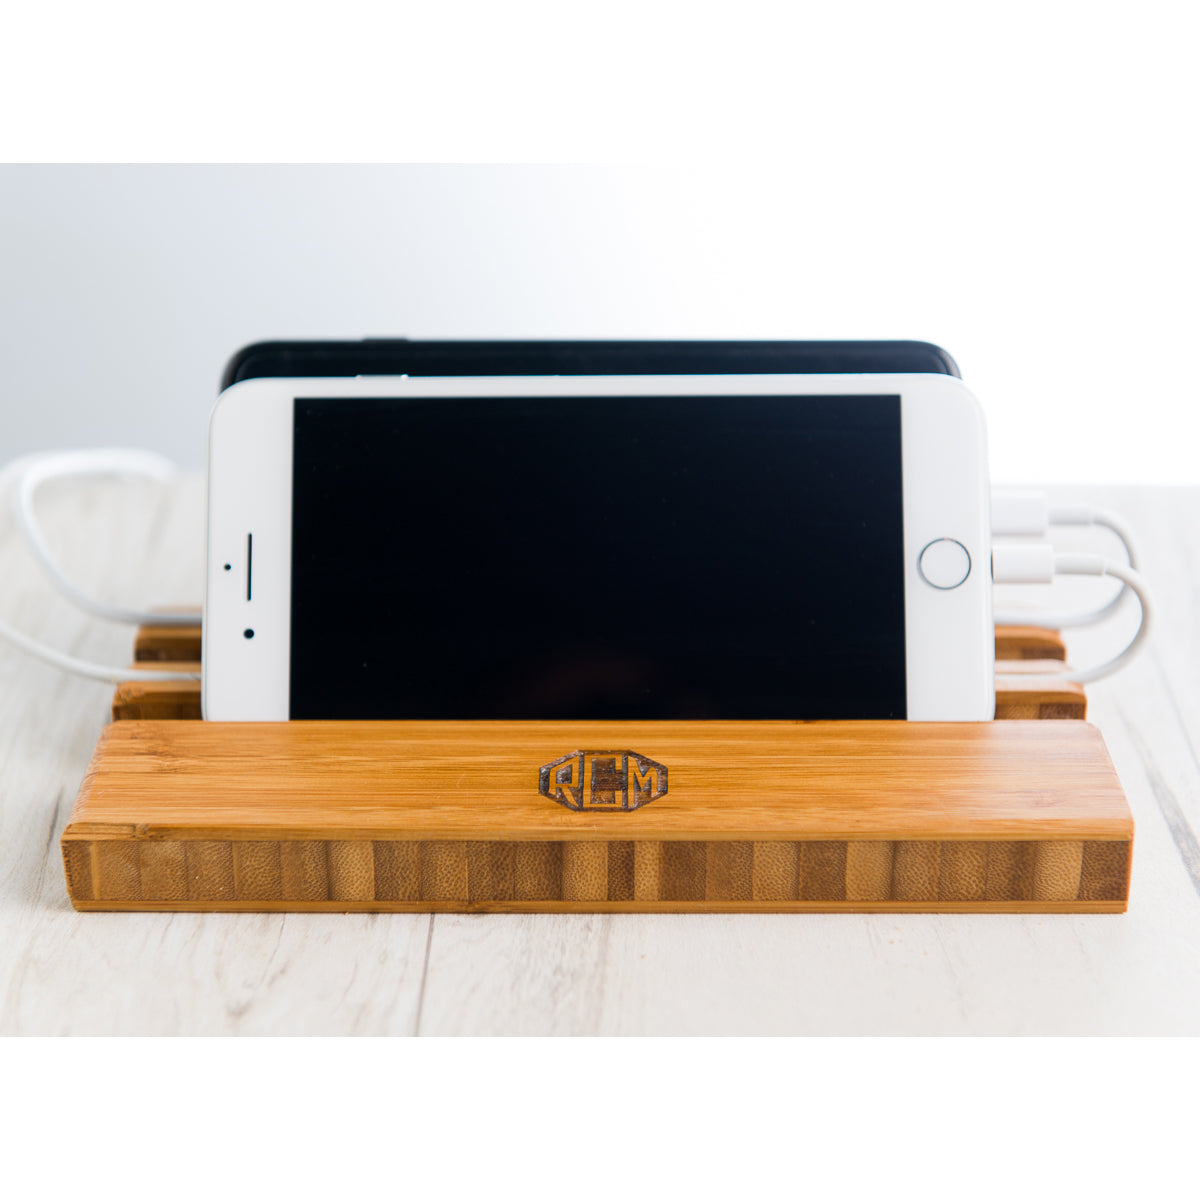 The Double Slot Personalized Phone Charging Dock